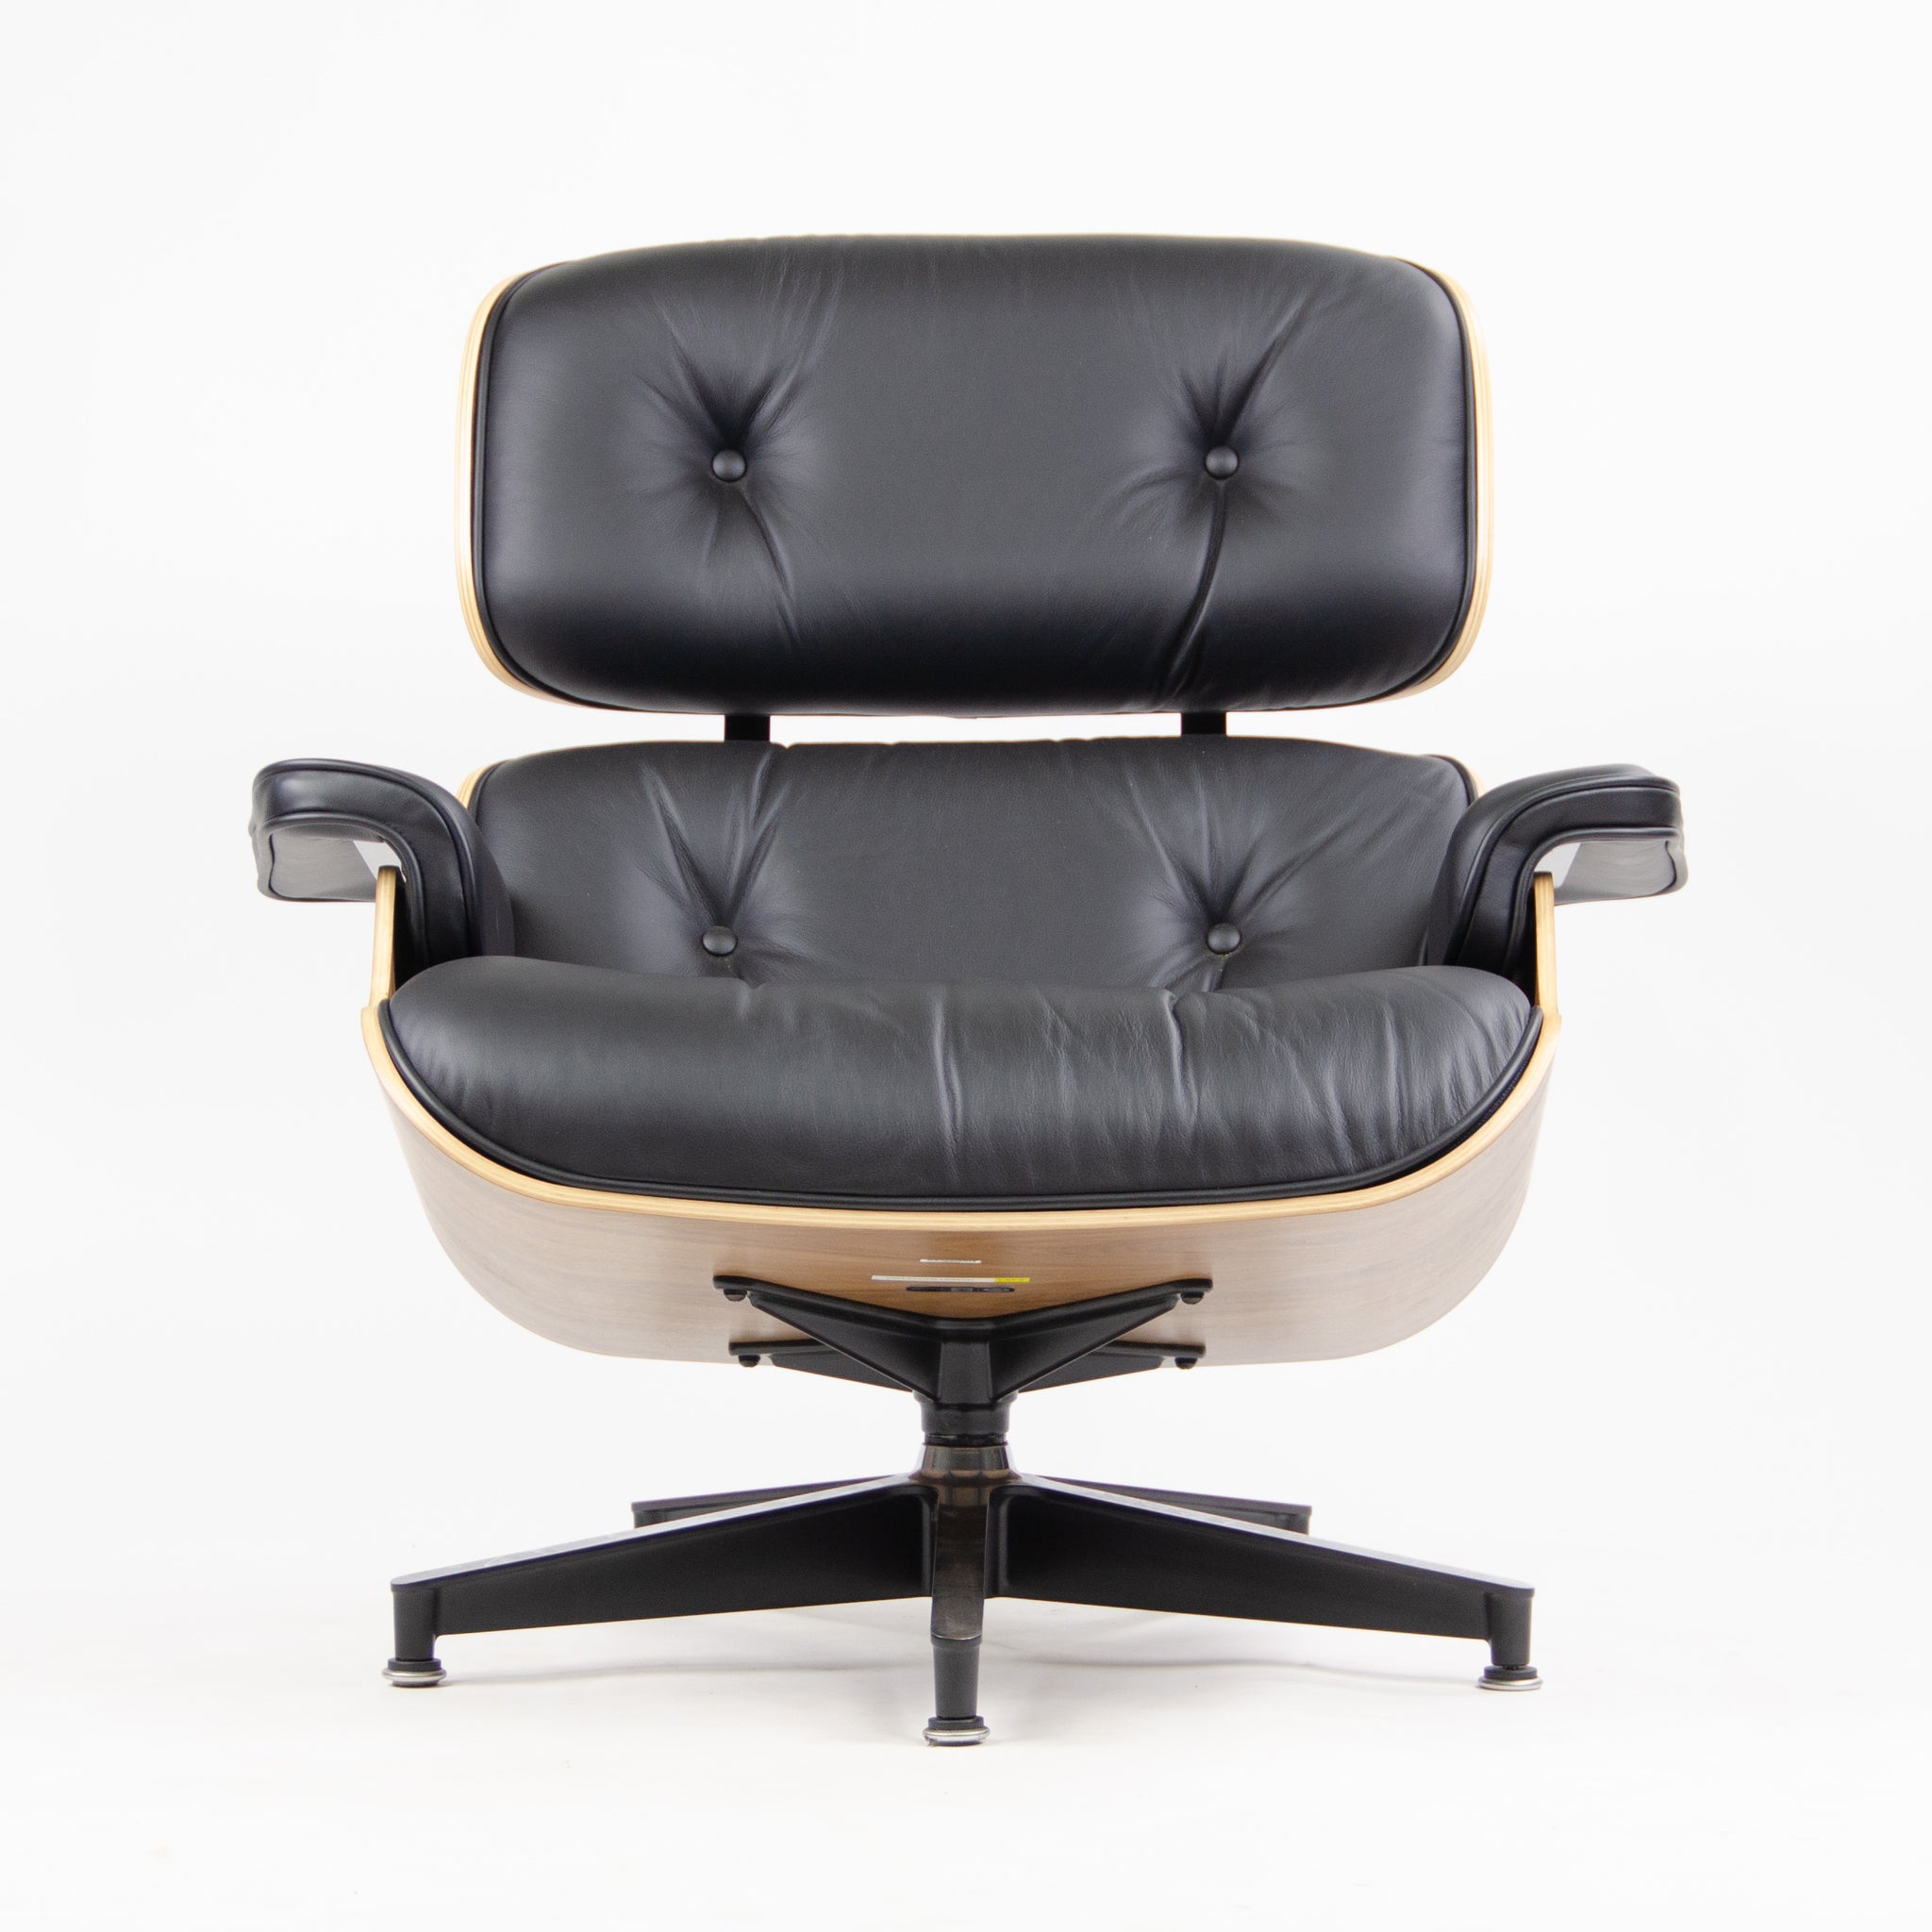 SOLD BRAND NEW 2018 Herman Miller Eames Lounge Chair & Ottoman Walnut 670 671 Black Leather